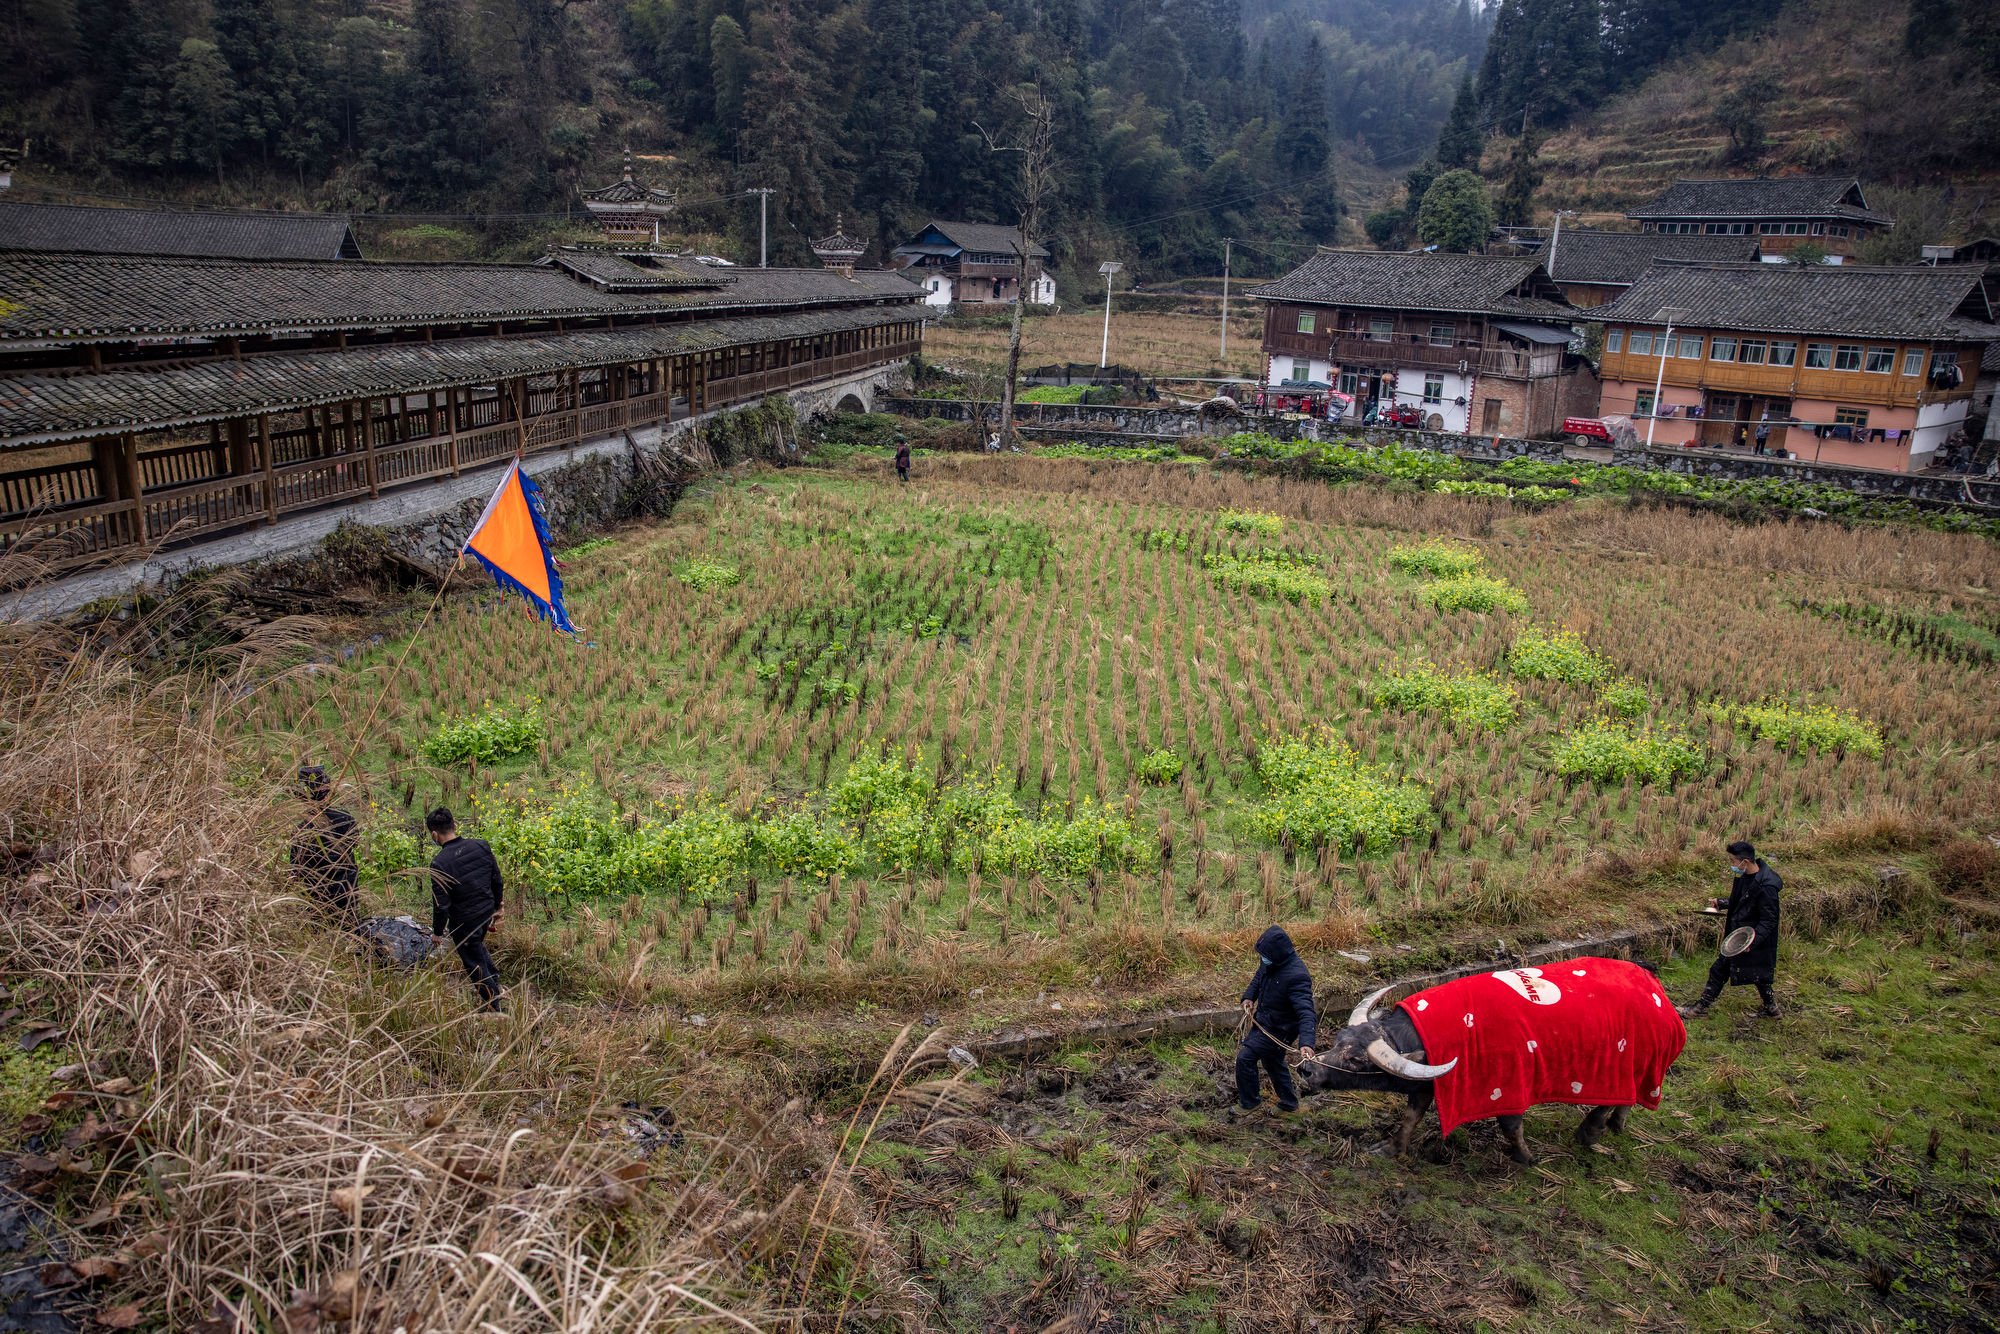  The procession with the buffalo returning to its home village, passing the Wind and Rain Bridge in the Wangdong village, Guizhou, China. 